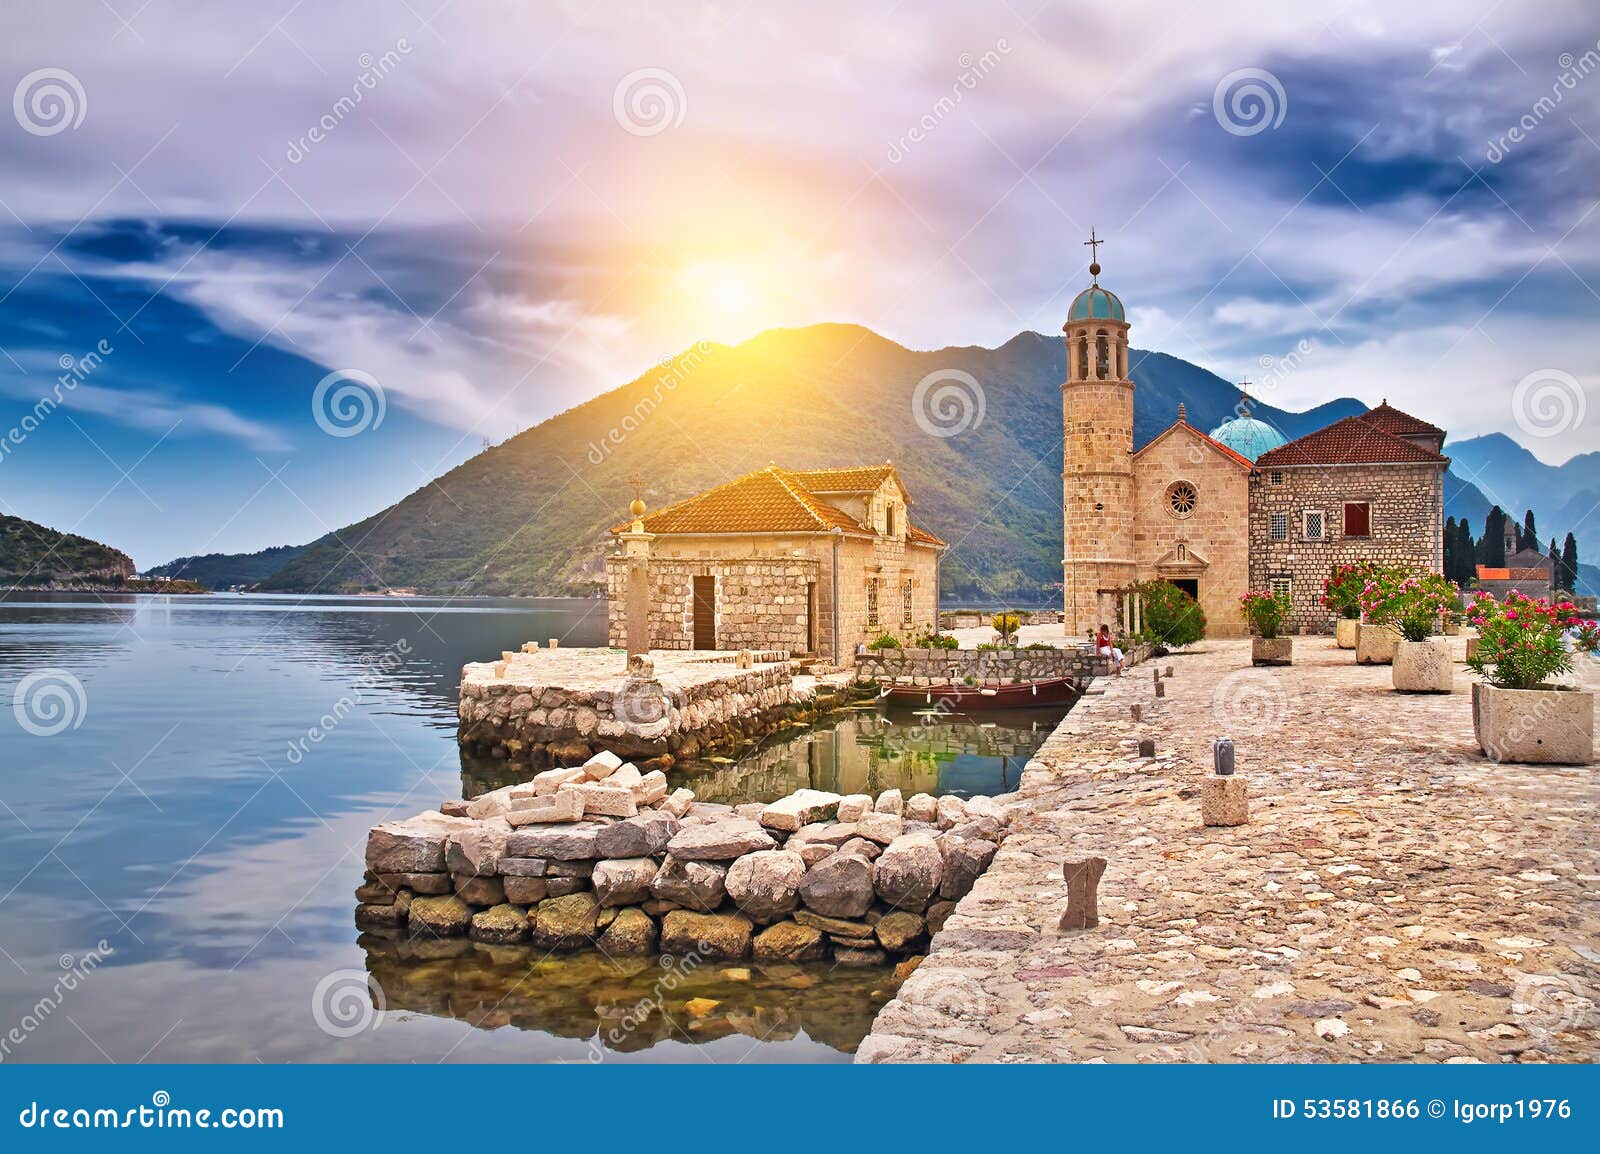 castle on the lake in montenegro